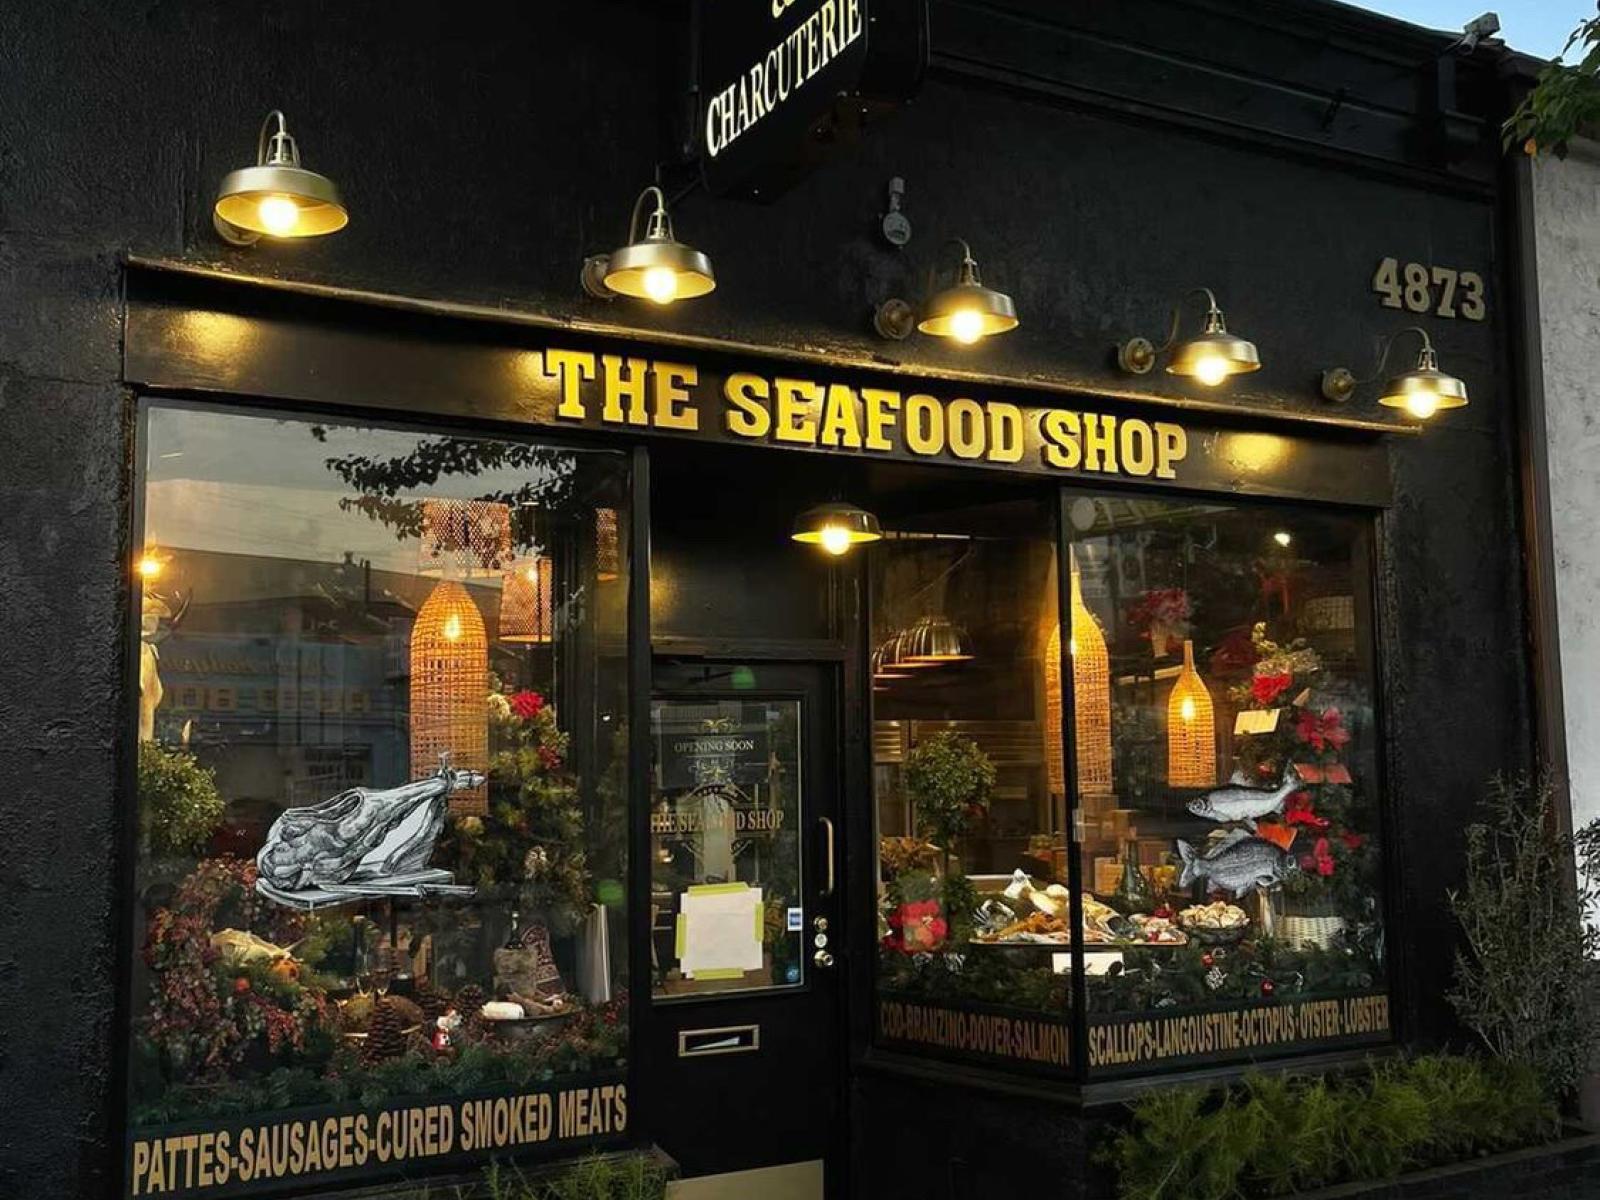 The Seafood Shop Gourmet & Charcuterie